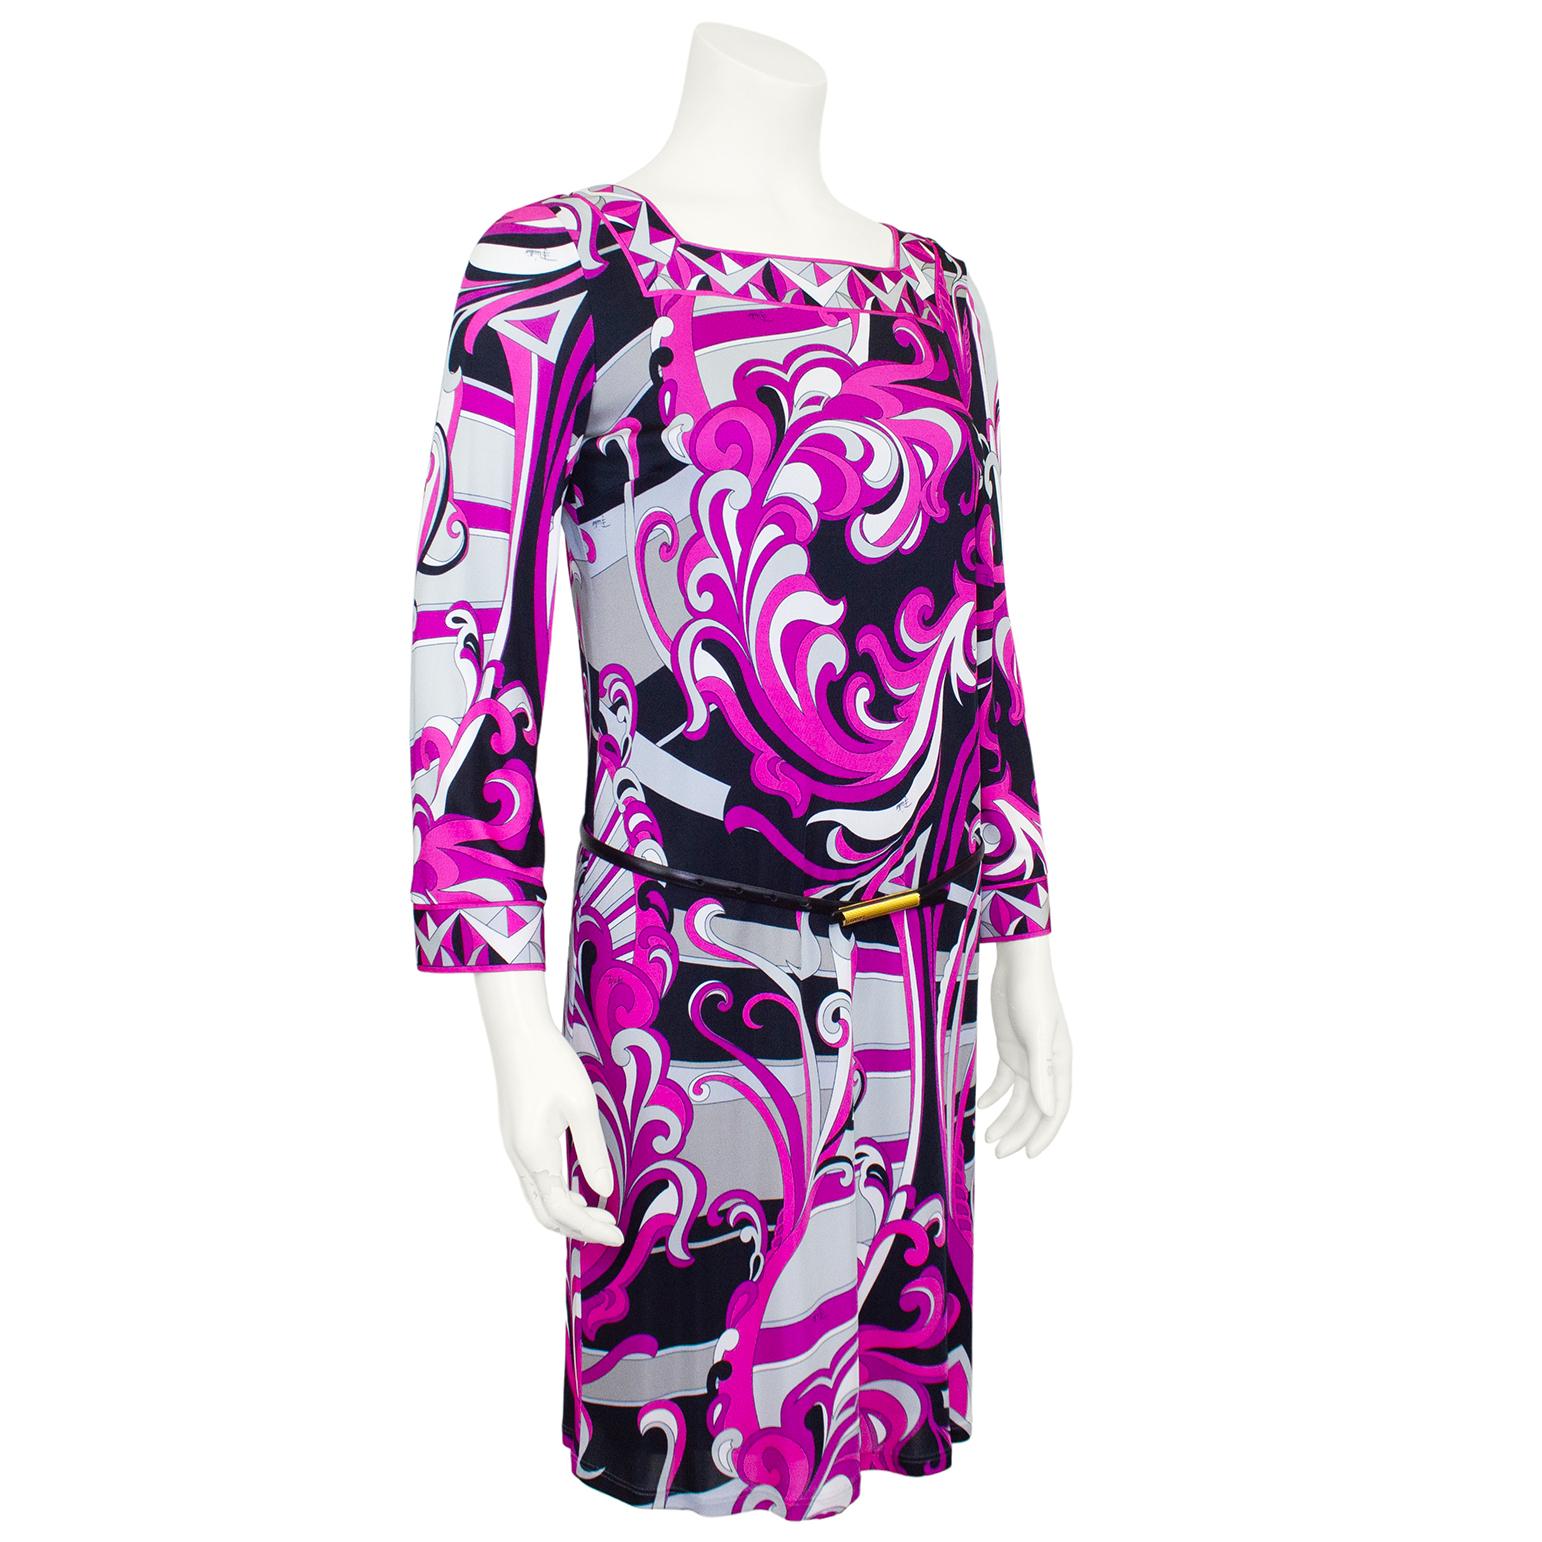 Emilio Pucci printed lycra dress from the 1990s. Abstract swirling pink, grey and black floral print all over with geometric trim at the neckline and cuffs. Square neckline and slightly bell shaped long sleeves. Thin black leather belt with gold